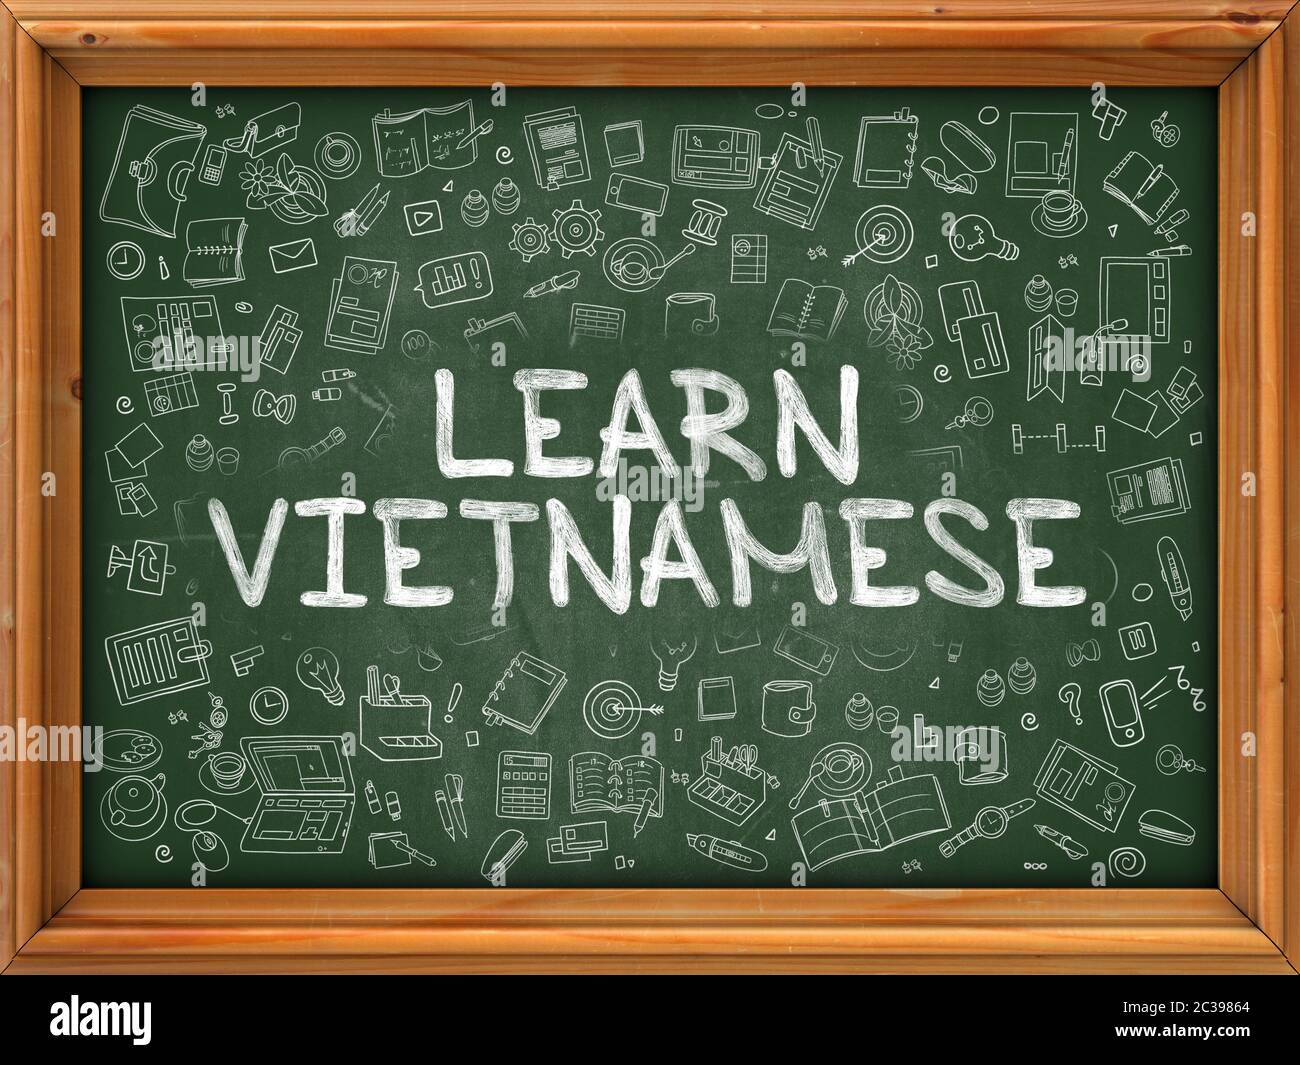 Learn Vietnamese - Hand Drawn on Green Chalkboard with Doodle Icons Around. Modern Illustration with Doodle Design Style. Stock Photo